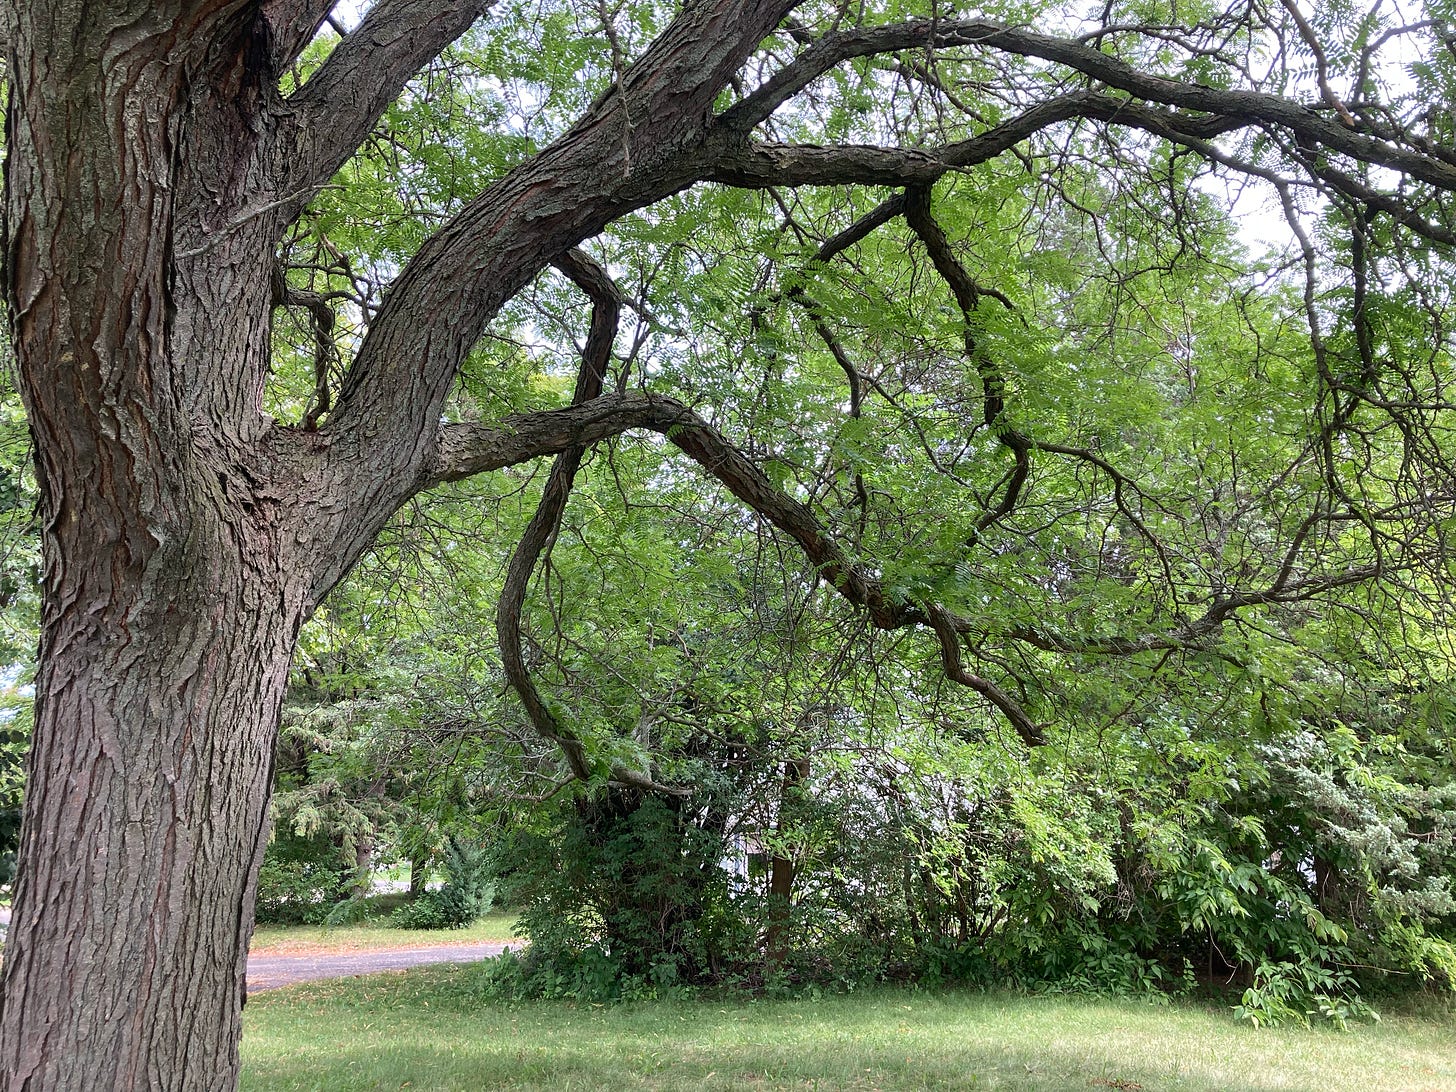 A photo of part of a honeylocust, with the trunk on the left in the foreground, and branches receding away from the camera toward the right.